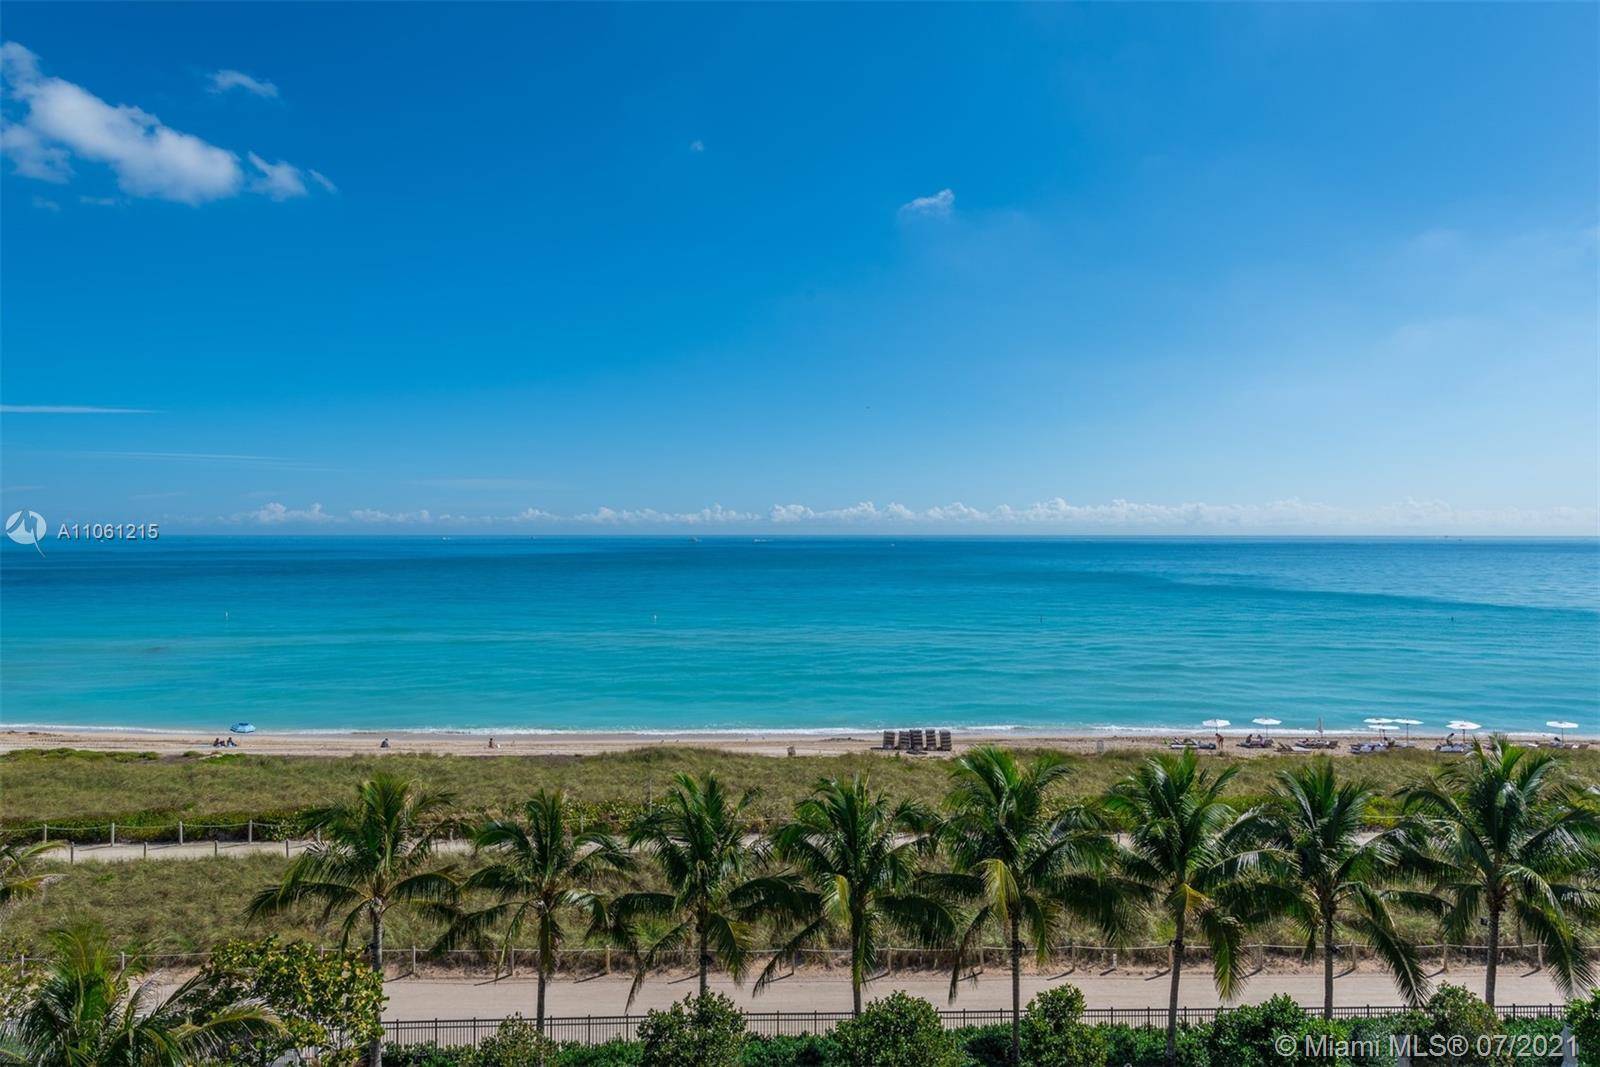 Experience Four Seasons living in this rarely available 3 bedroom direct ocean corner residence designed by Pritzker Prize award winning architect Richard Meier.